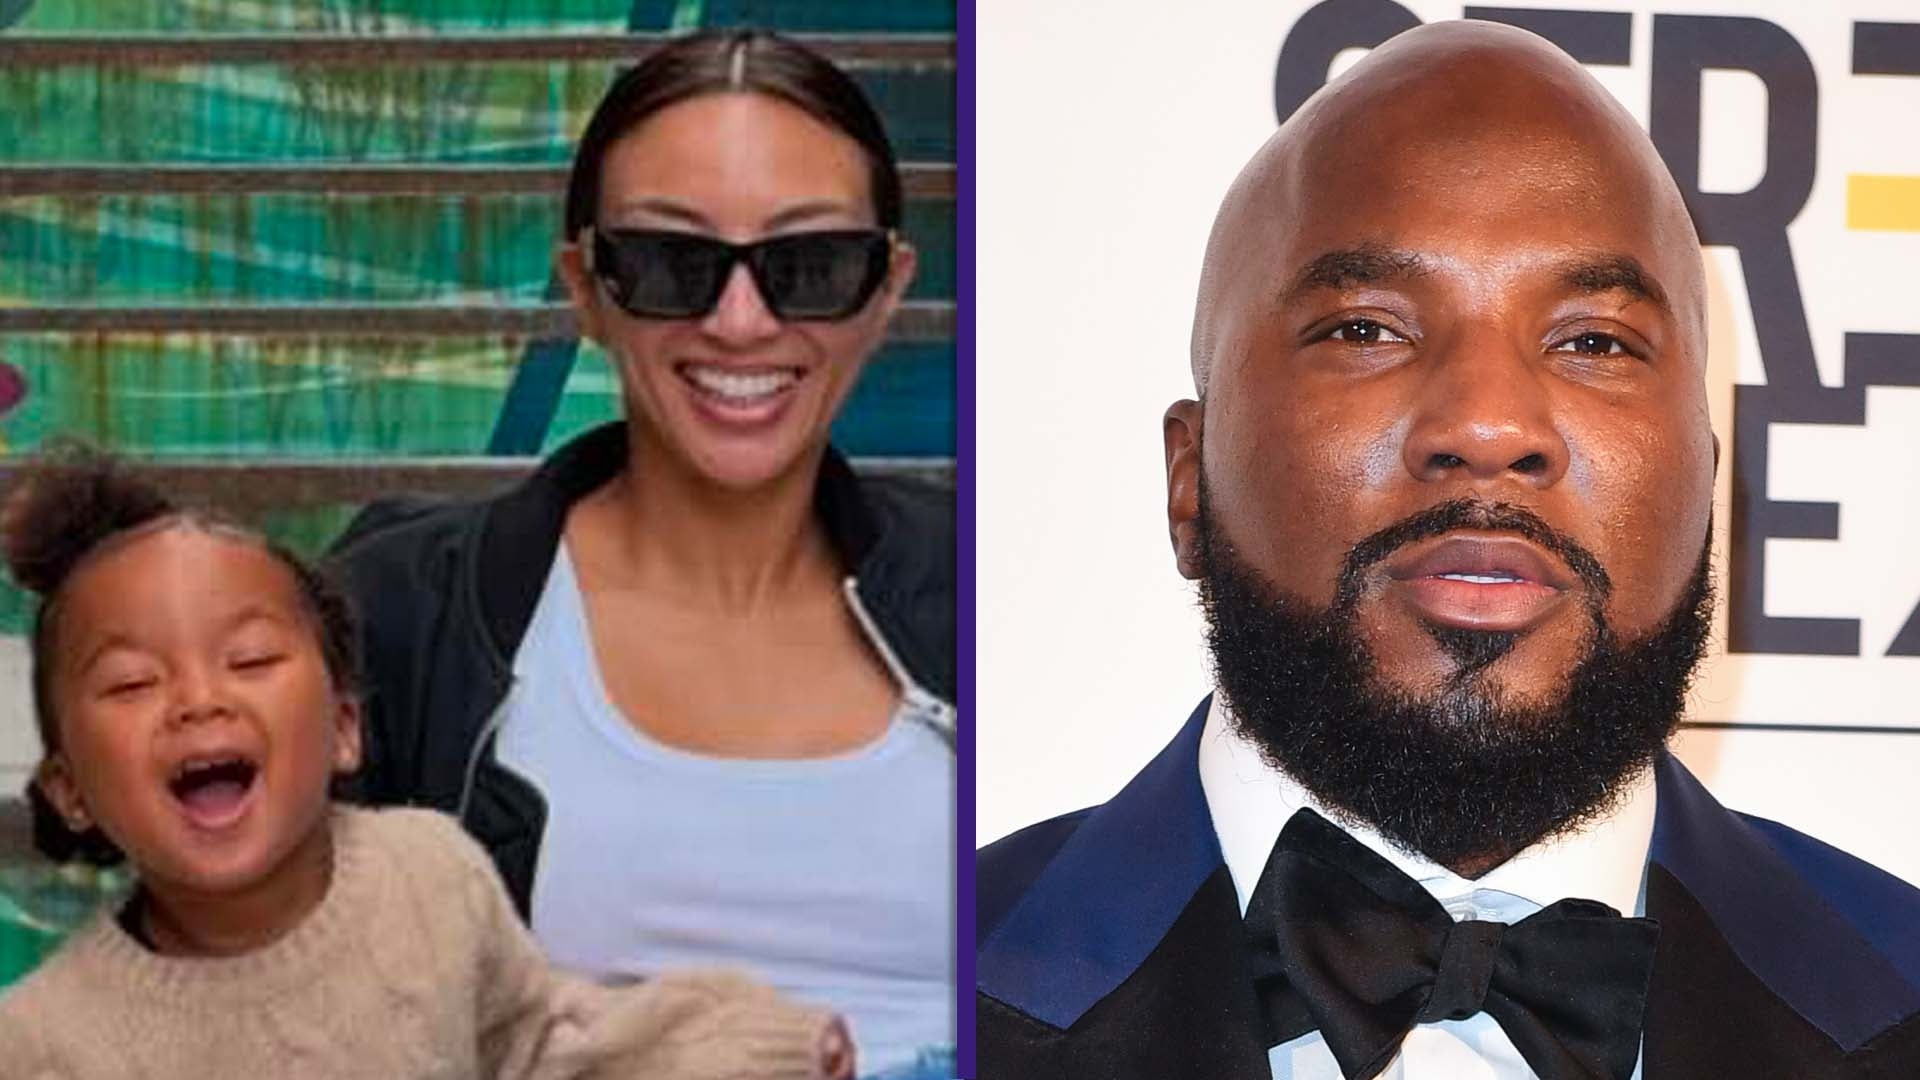 Jeannie Mai Smiles and Laughs With Daughter as Custody Battle With Jeezy Takes a Turn